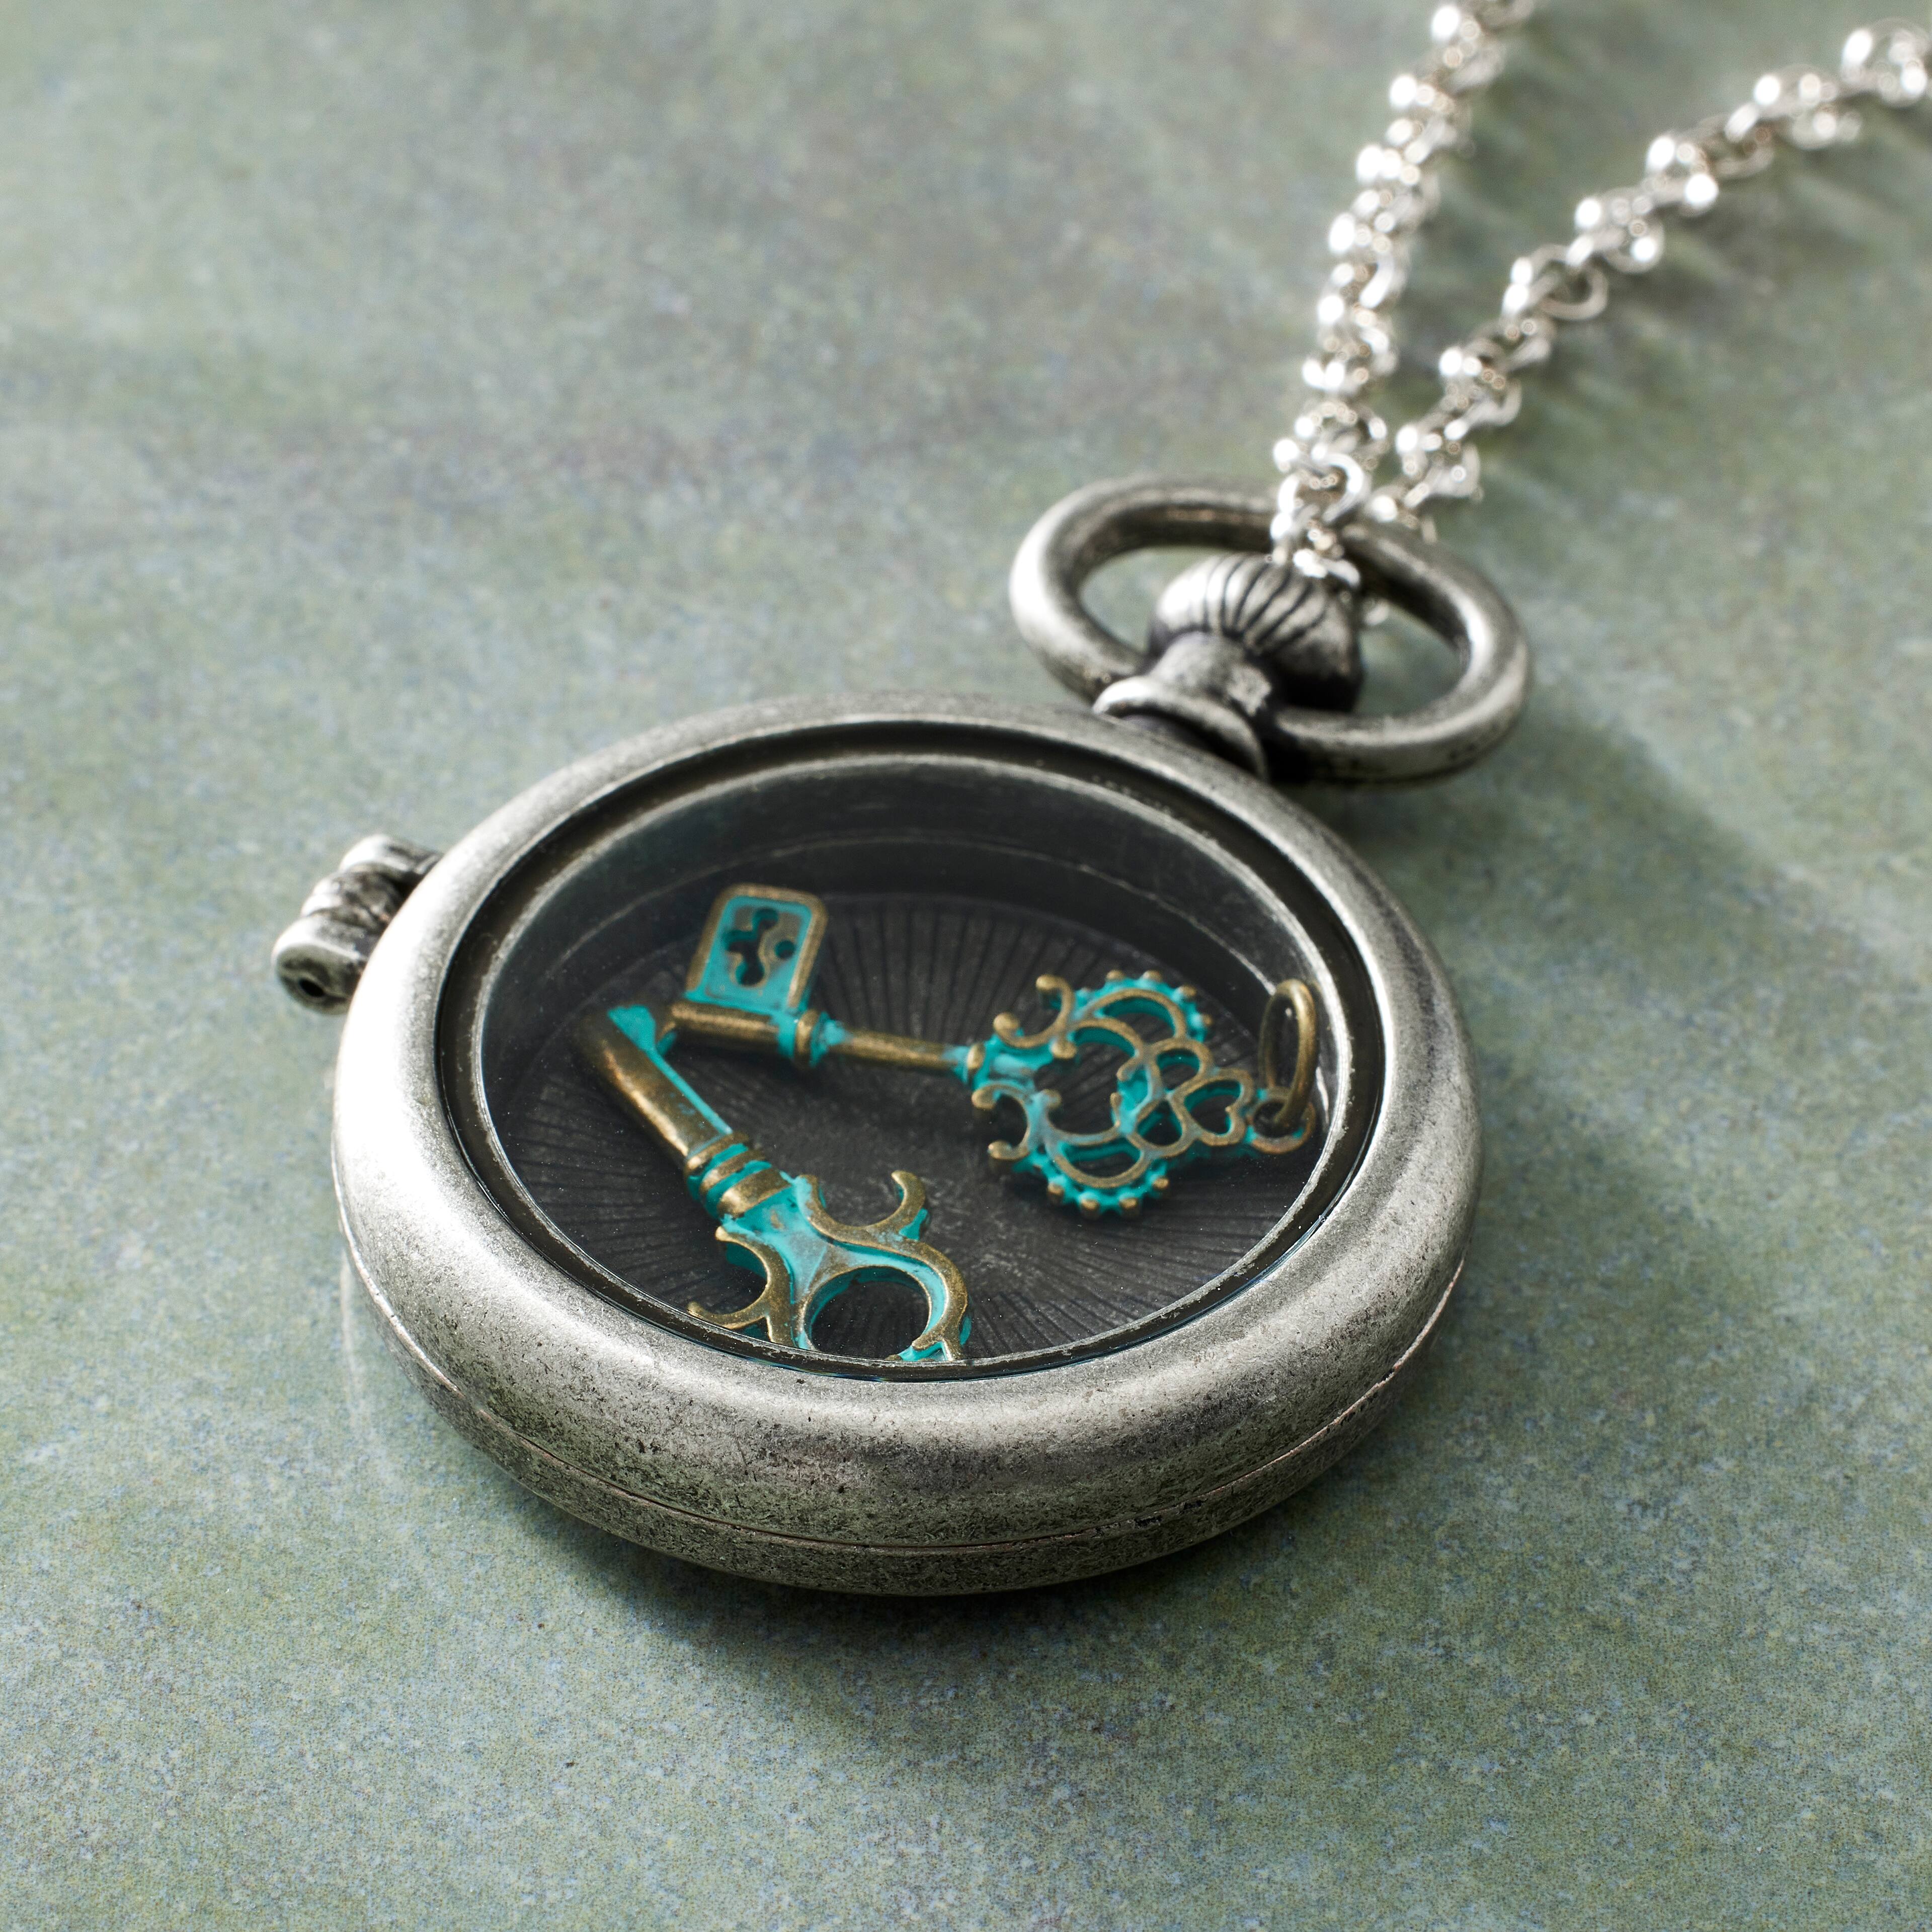 12 Pack: Found Objects&#x2122; Pocket Watch Frame Locket by Bead Landing&#x2122;